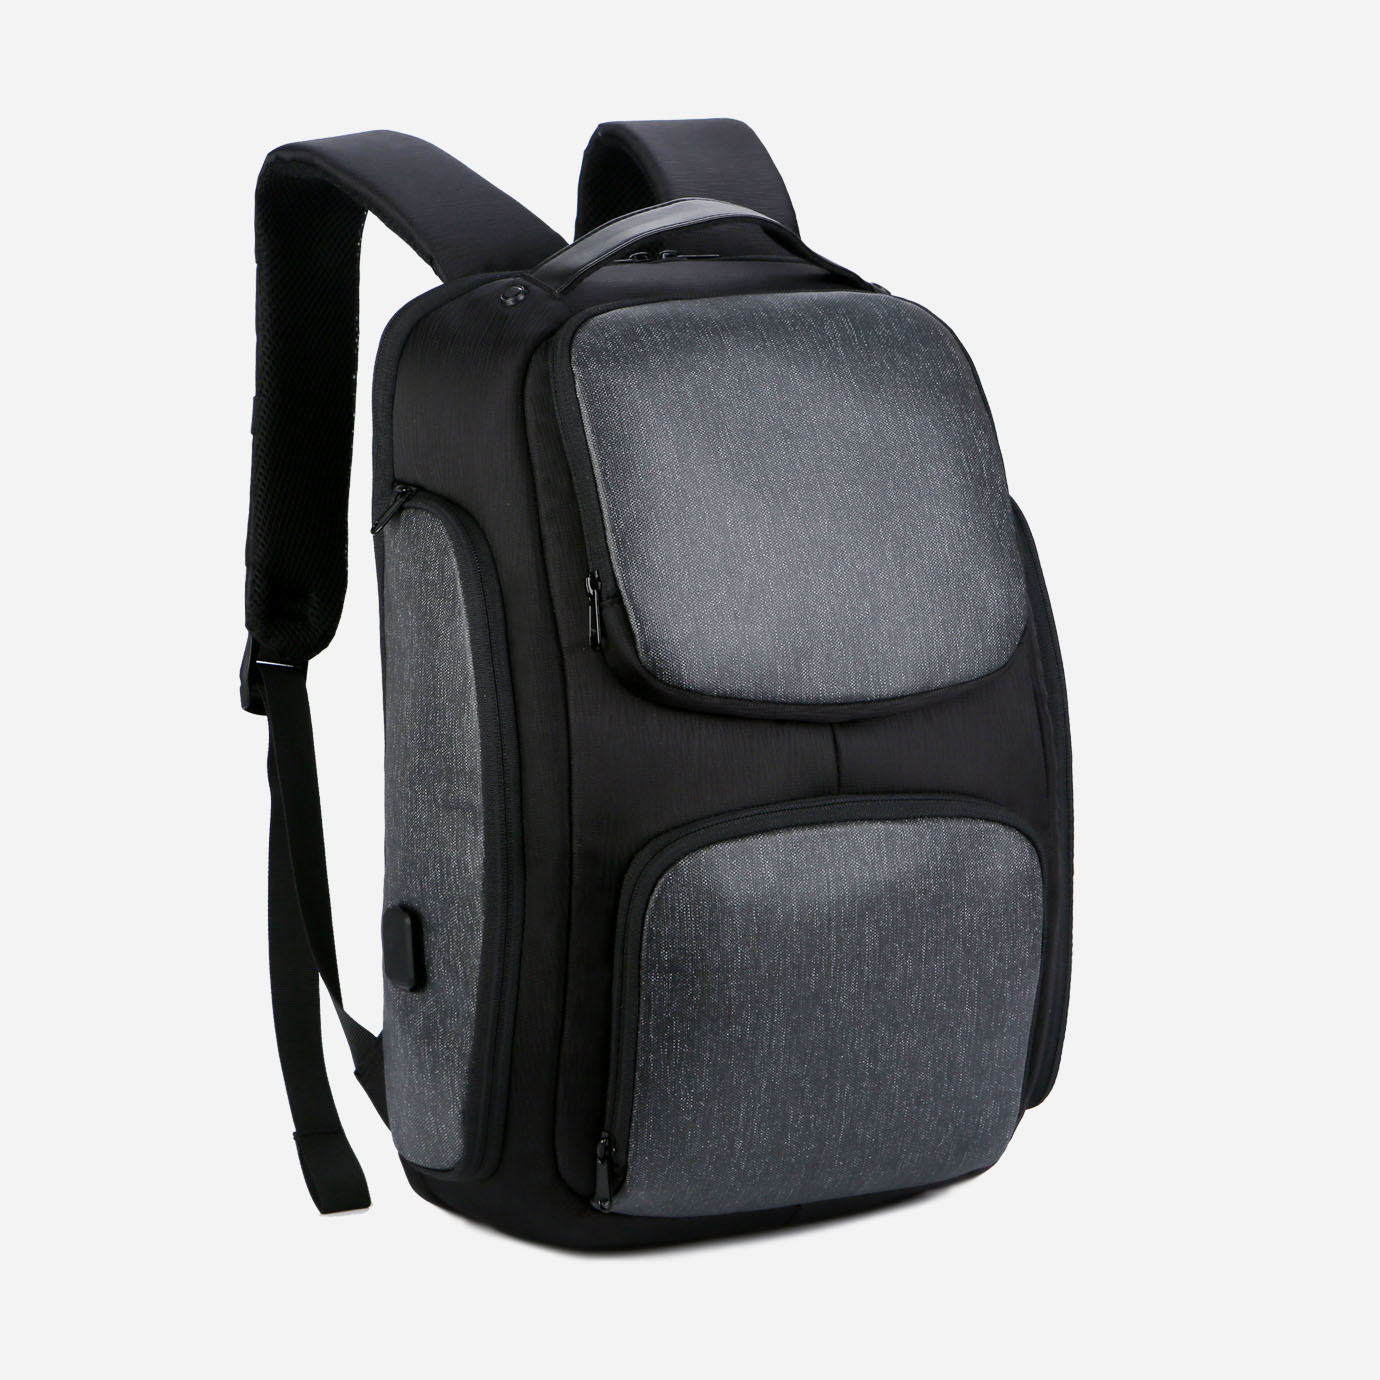 Nordace - Discover Nordace Brampton - Smart Backpack